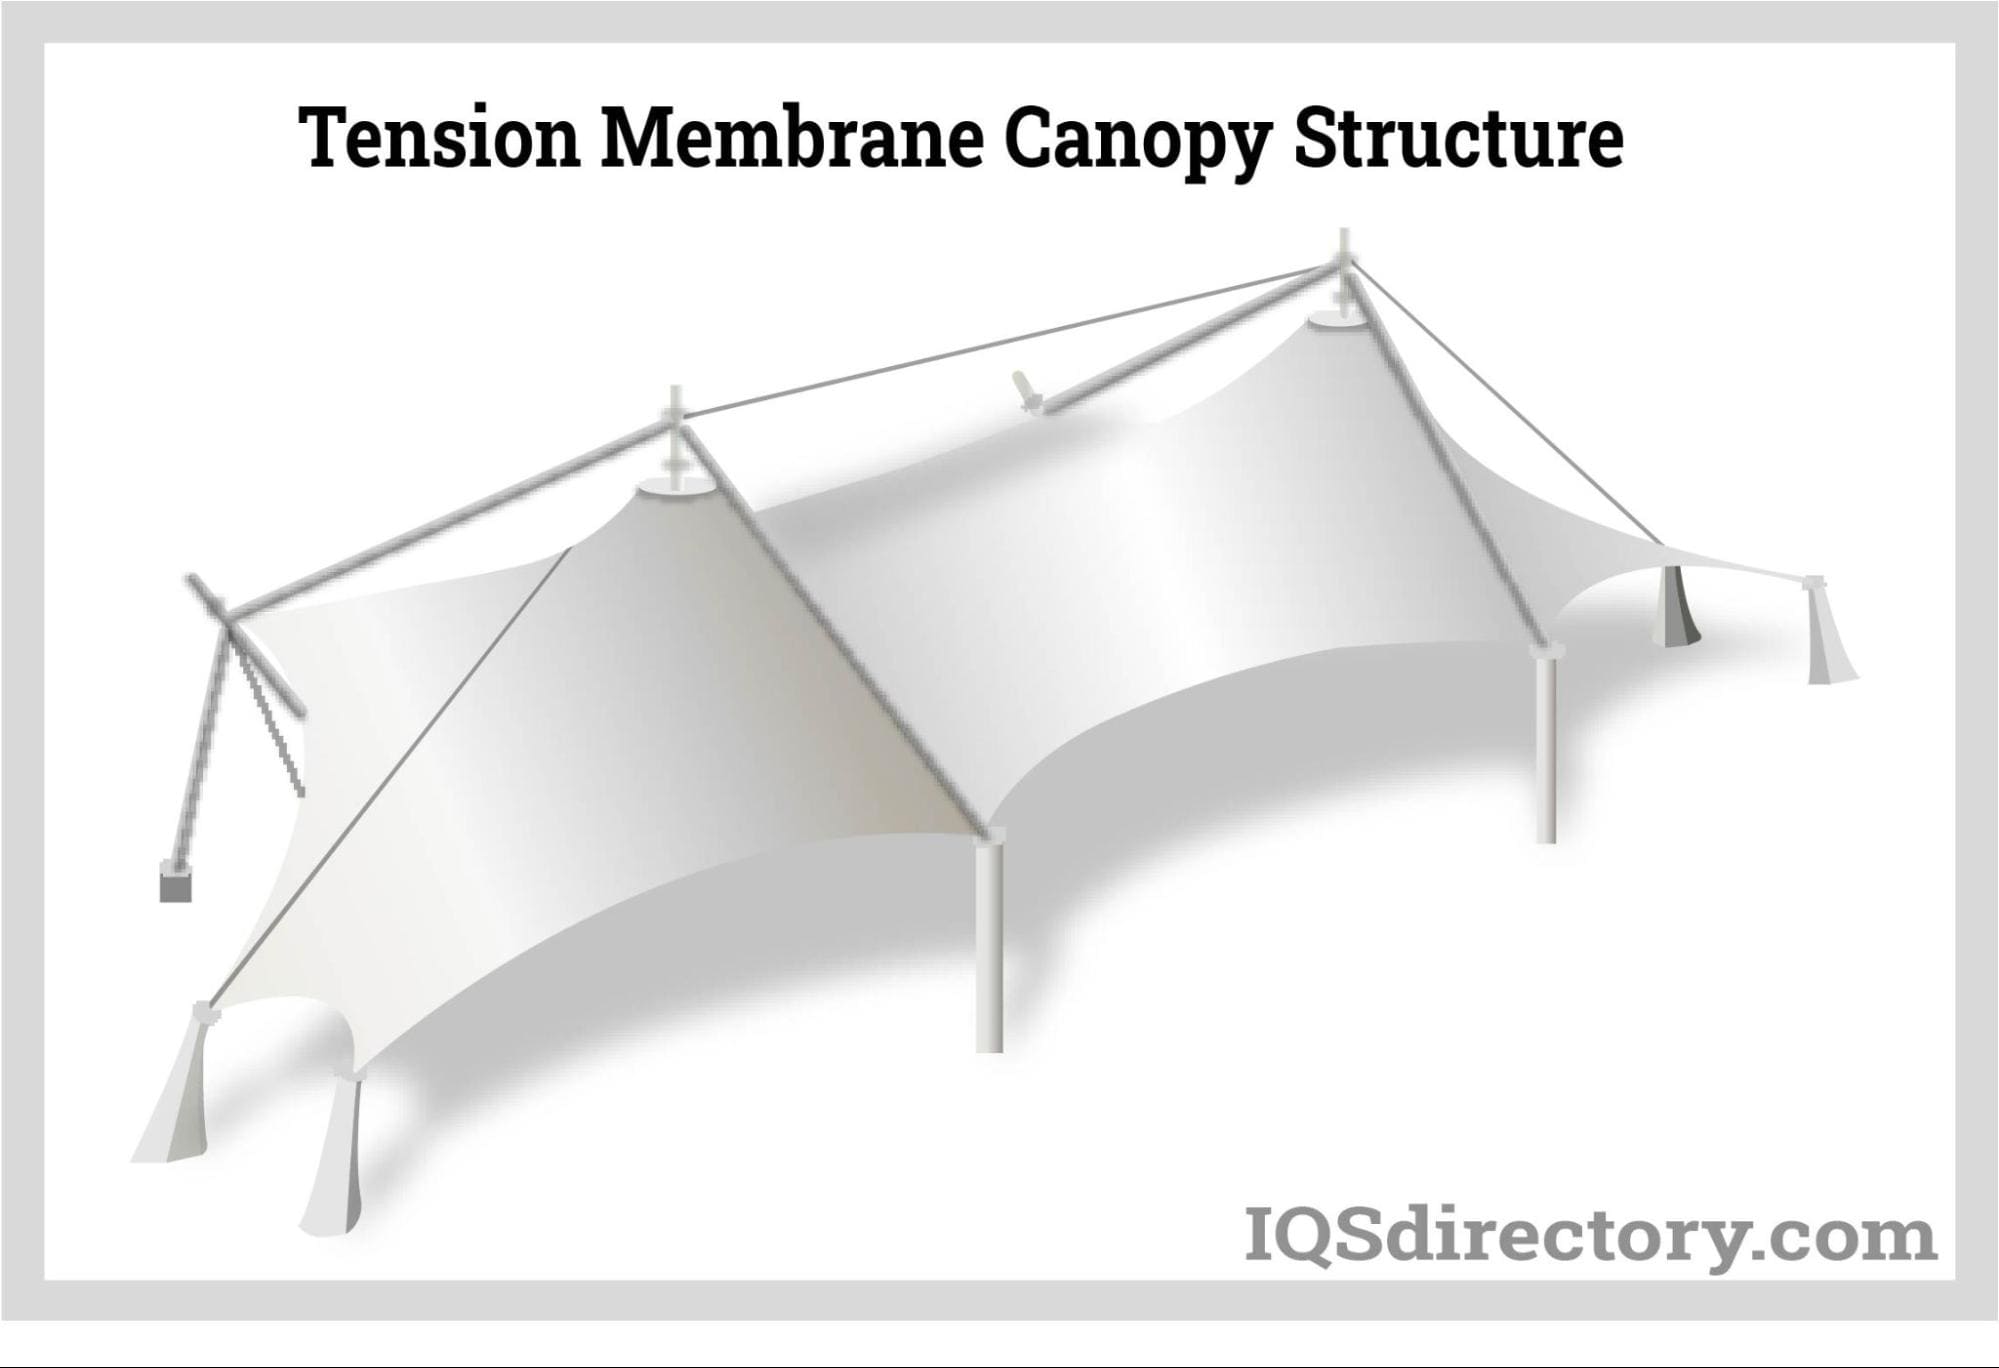 Tension Membrane Canopy Structure